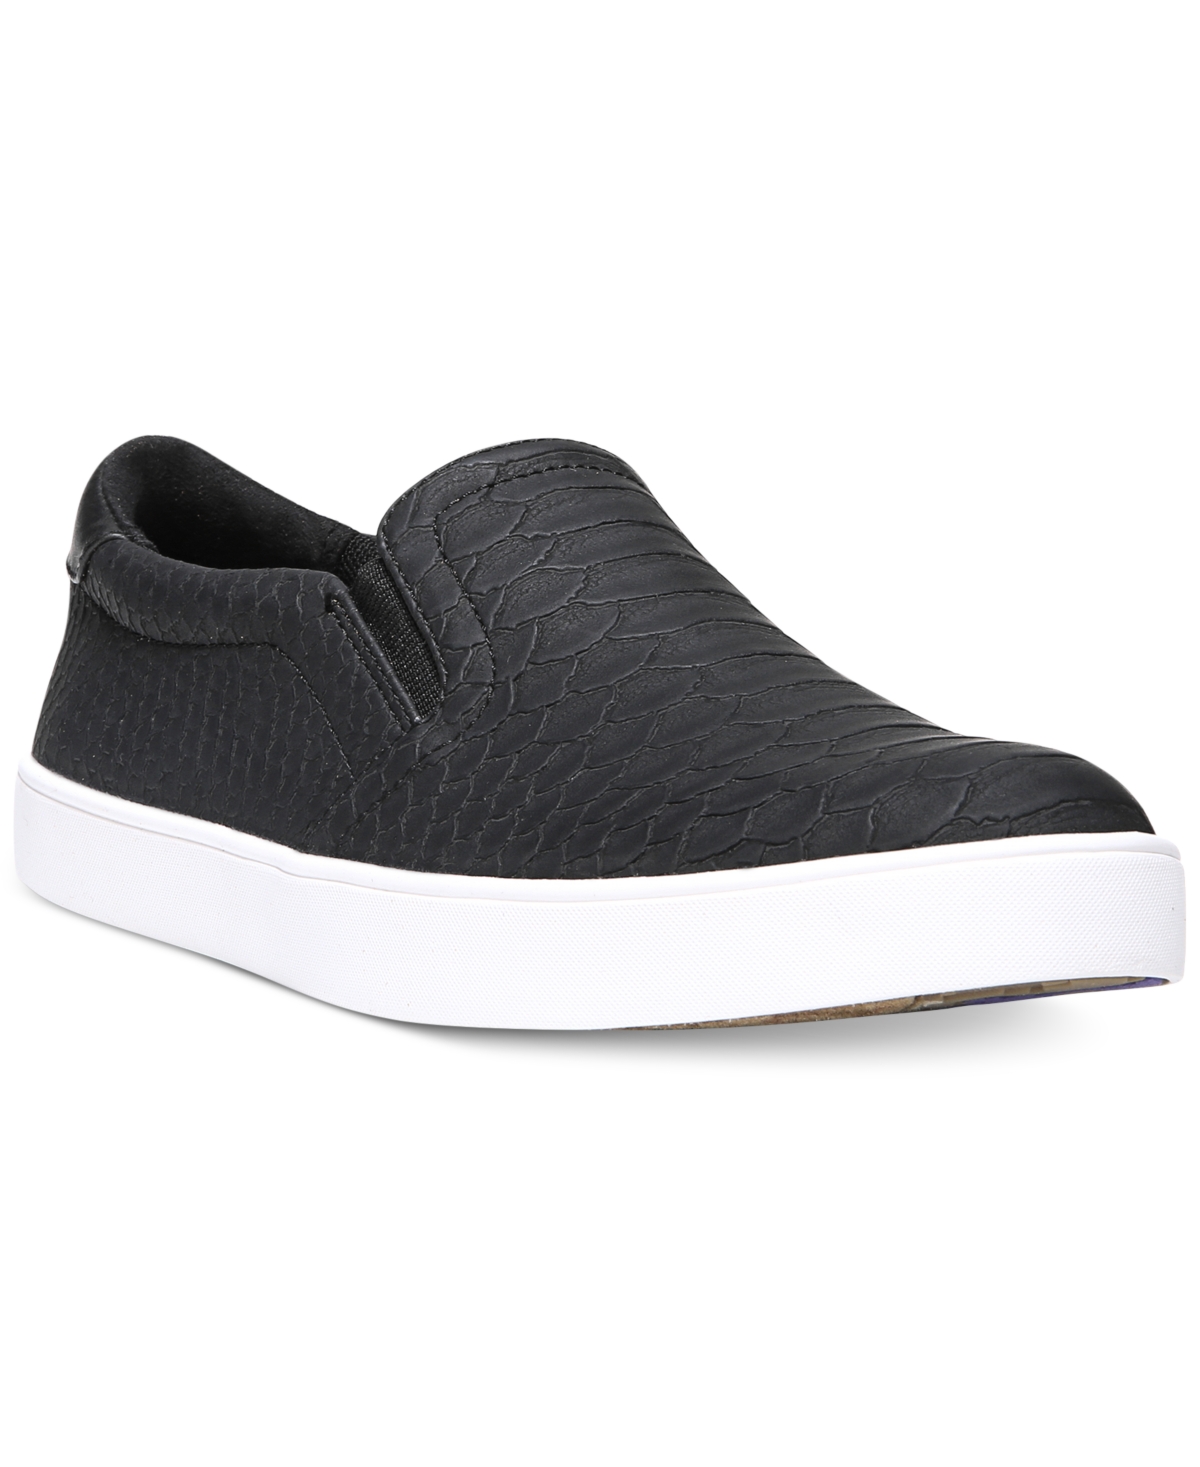 UPC 727679380218 product image for Dr. Scholl's Women's Madison Slip on Sneakers Women's Shoes | upcitemdb.com